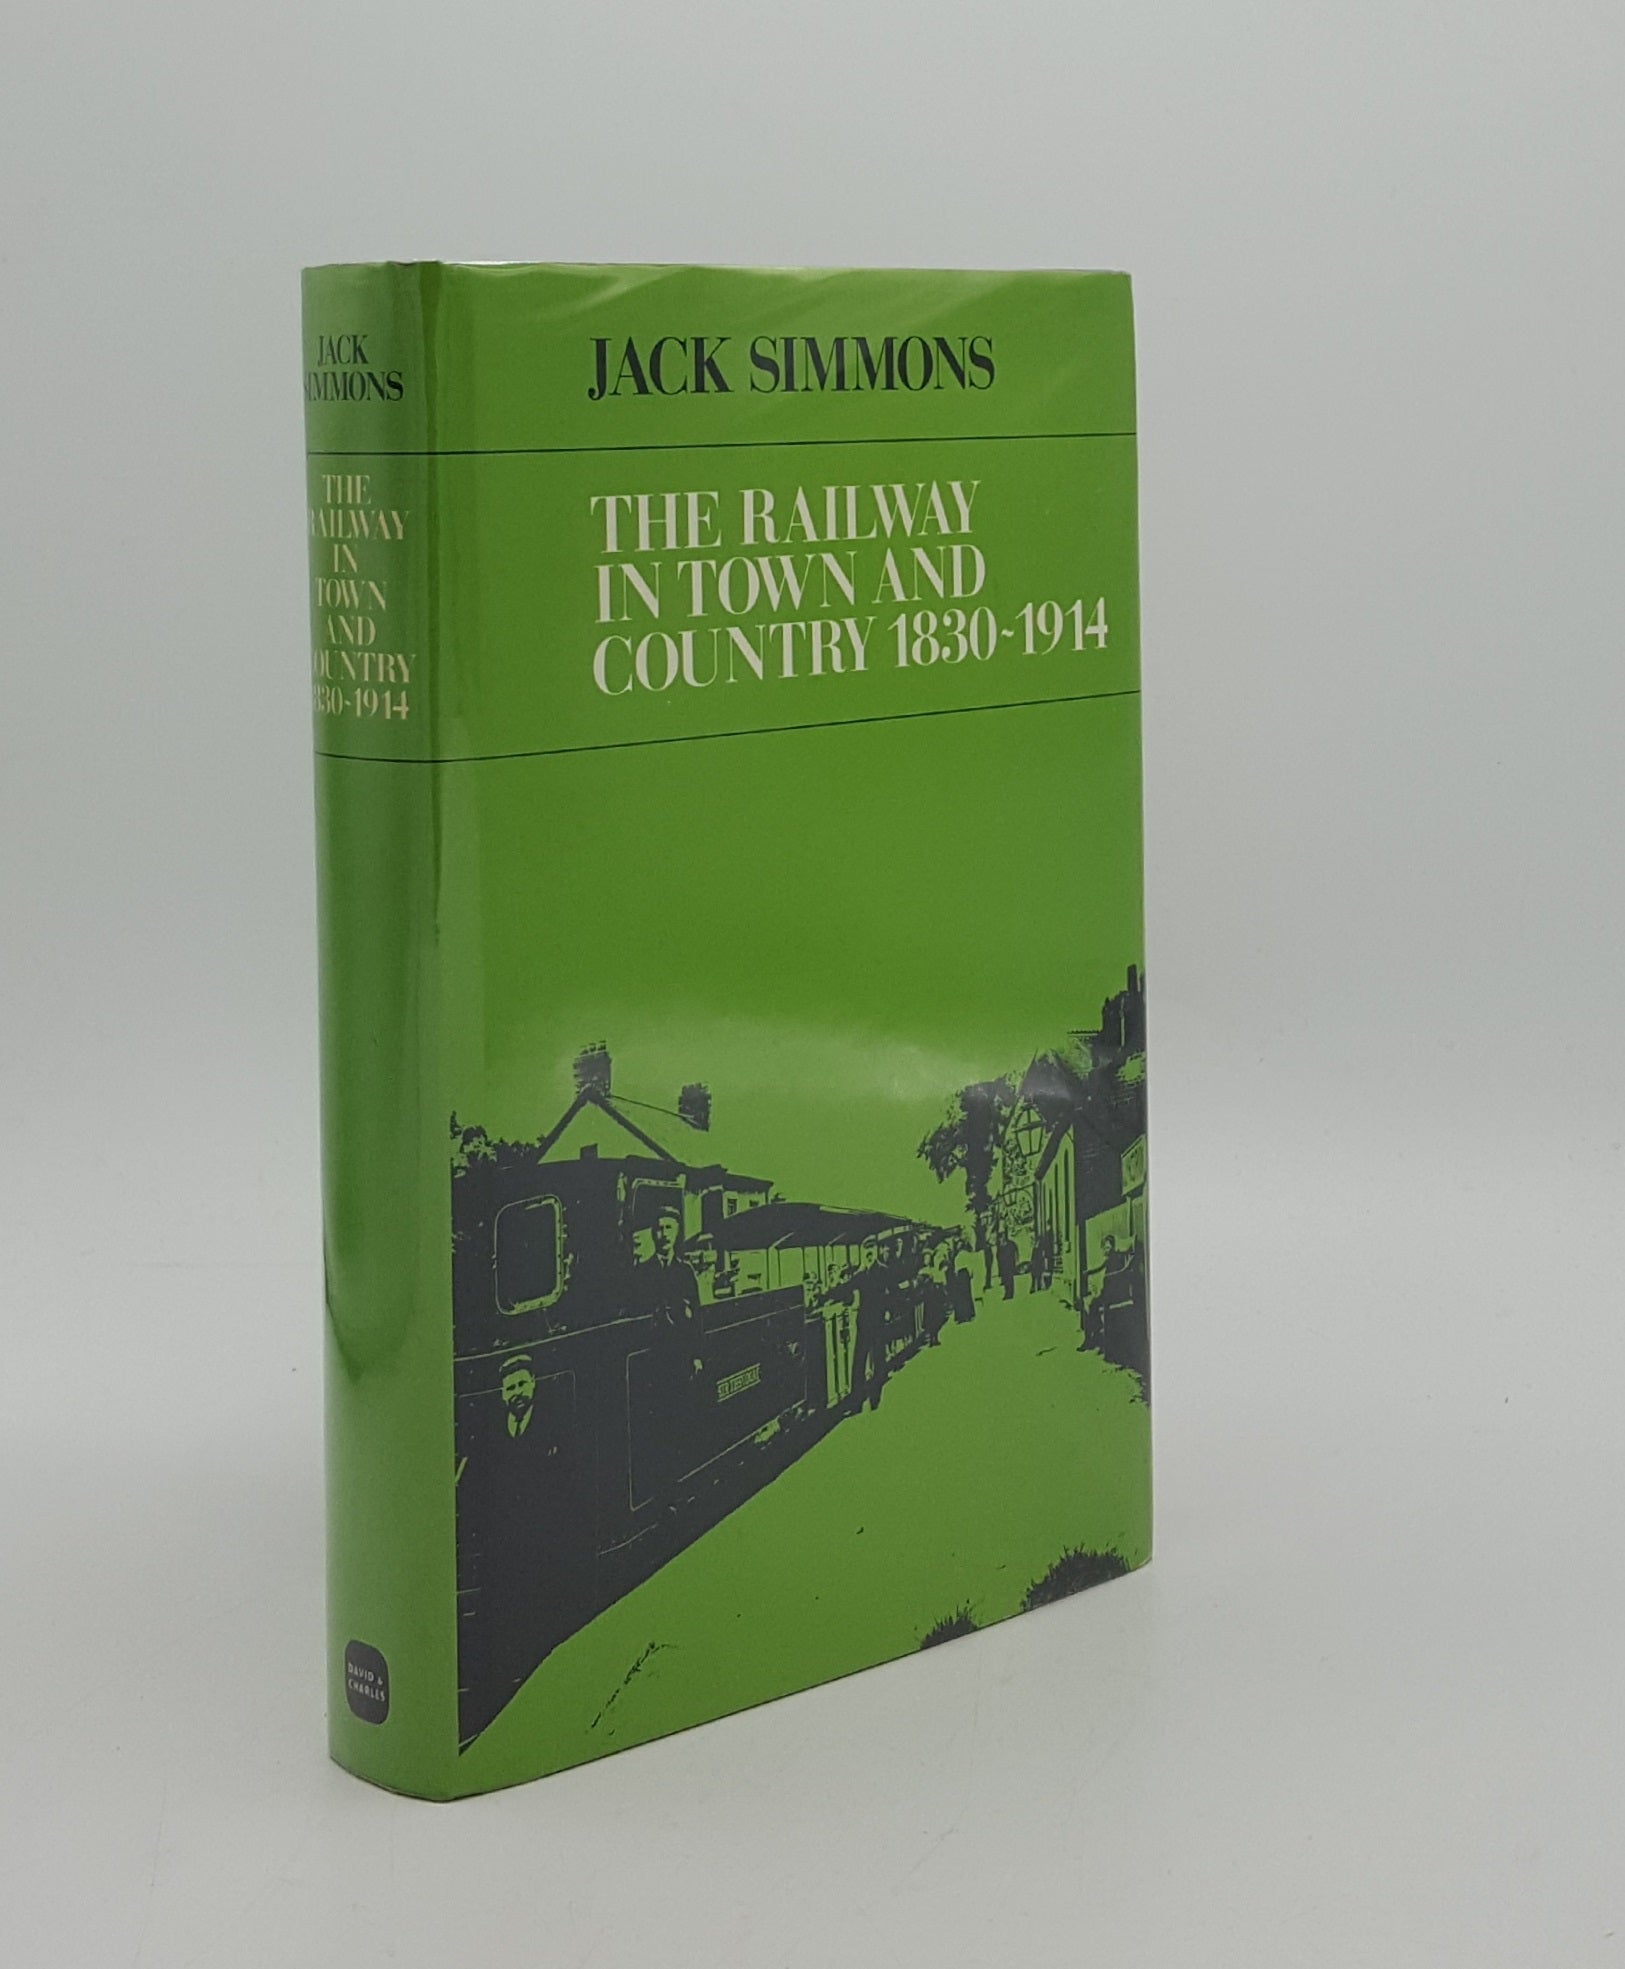 SIMMONS Jack - The Railway in Town and Country 1830-1914